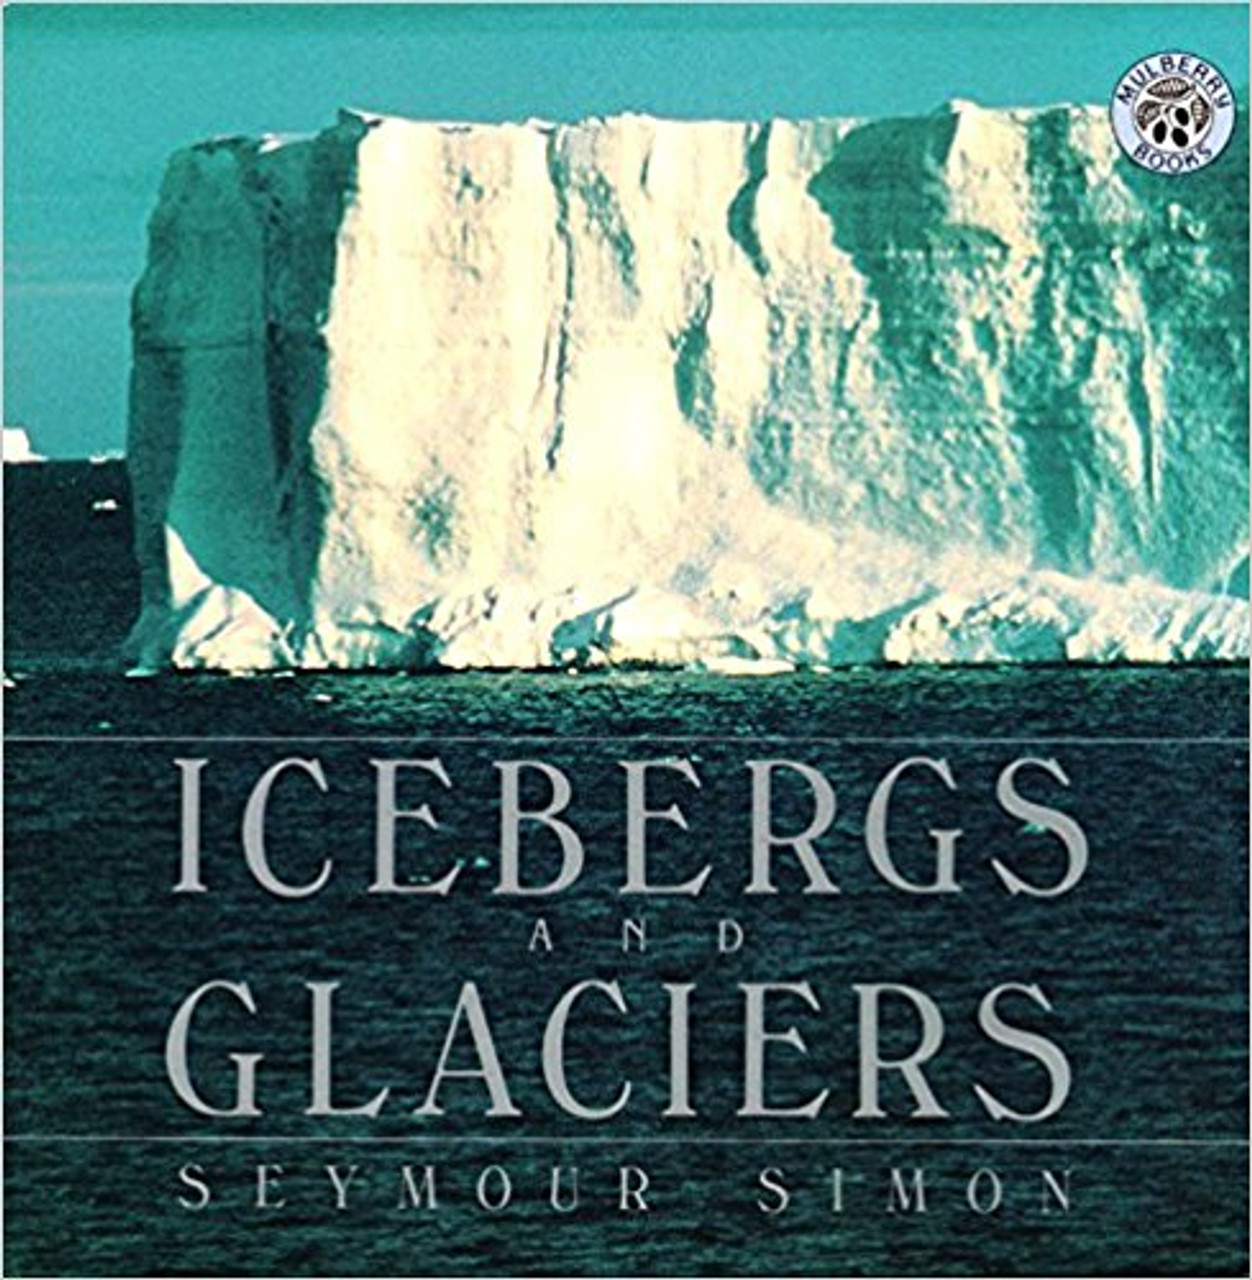 Discusses the formation, movement, and different types of glaciers and icebergs and describes their effect on the world around them.